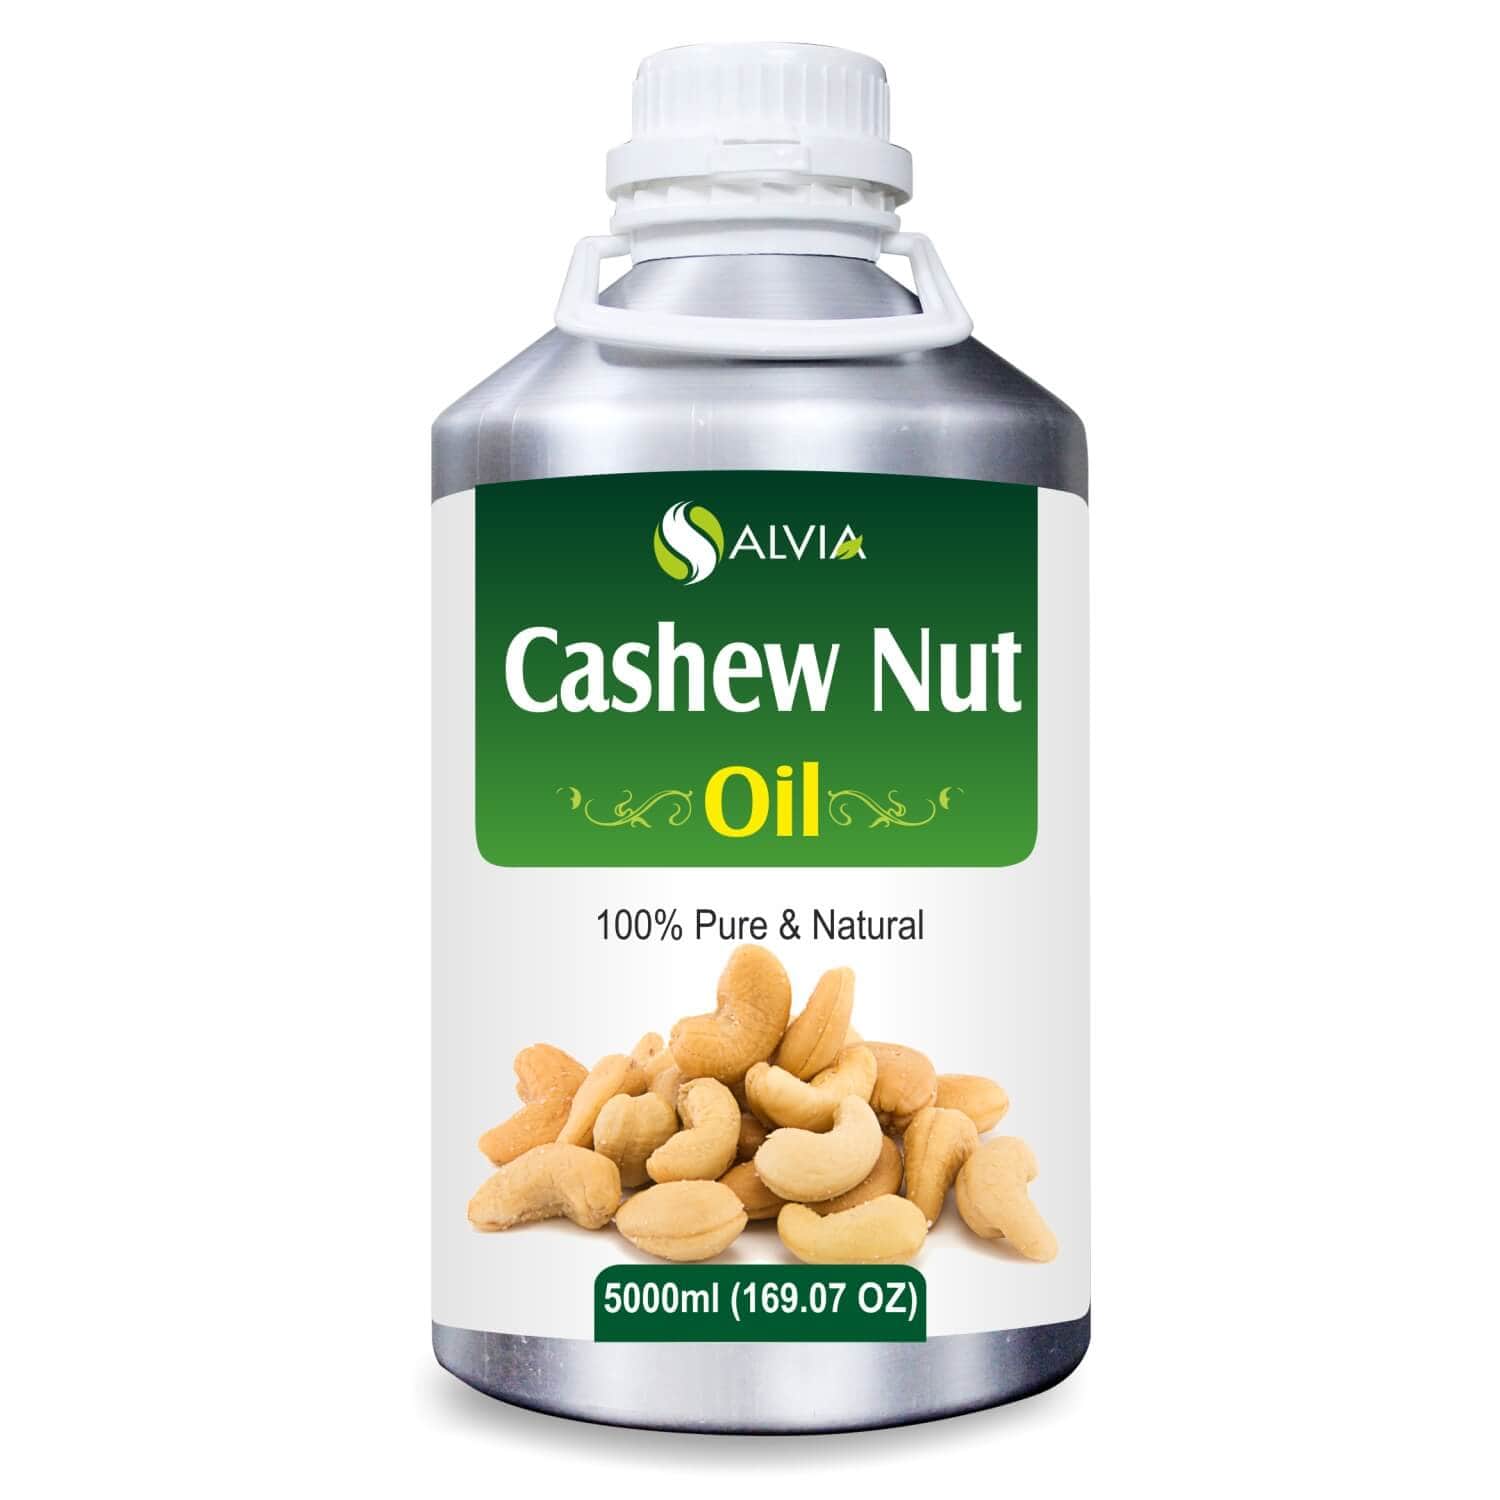 Salvia Natural Carrier Oils 5000ml Cashew Nut Oil (Anacardium Occibentale) 100% Natural Pure Carrier Oil Heals Wounds, Maintains Level Of Collagen & Elastin, Gives Shiny Texture to Hair